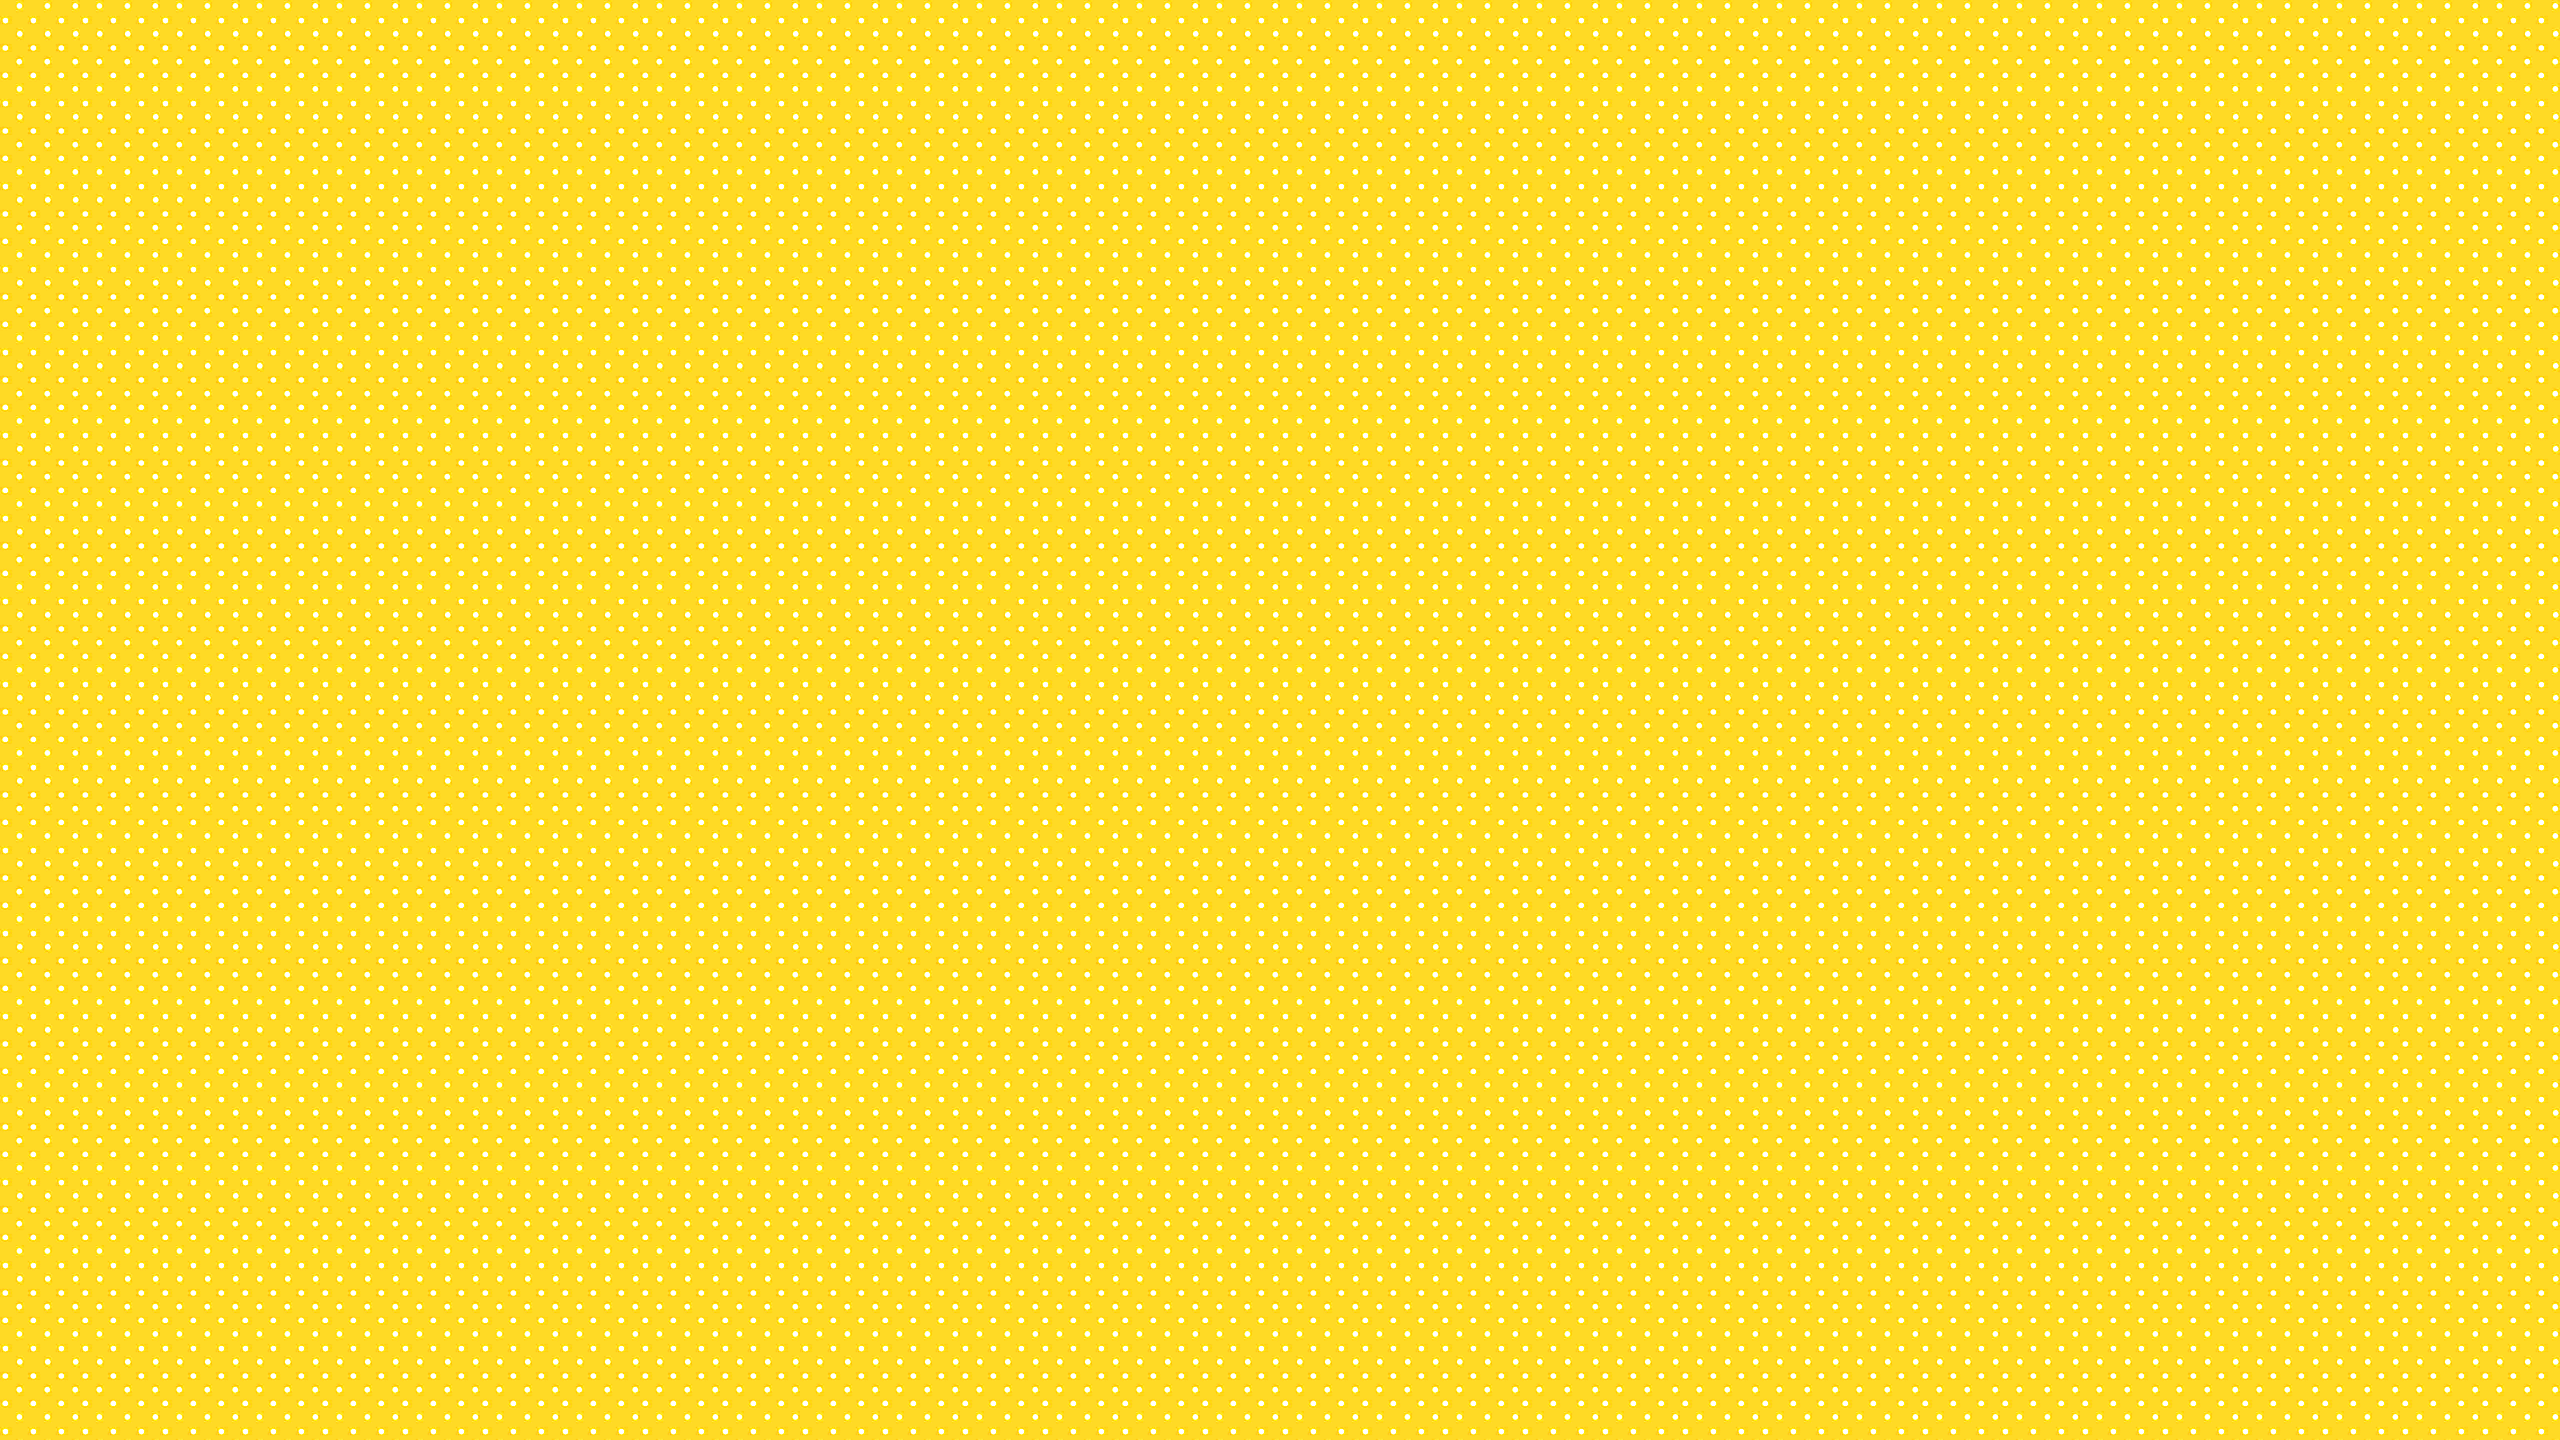 Yellow Polka Dots Desktop Wallpaper Is Easy Just Save The